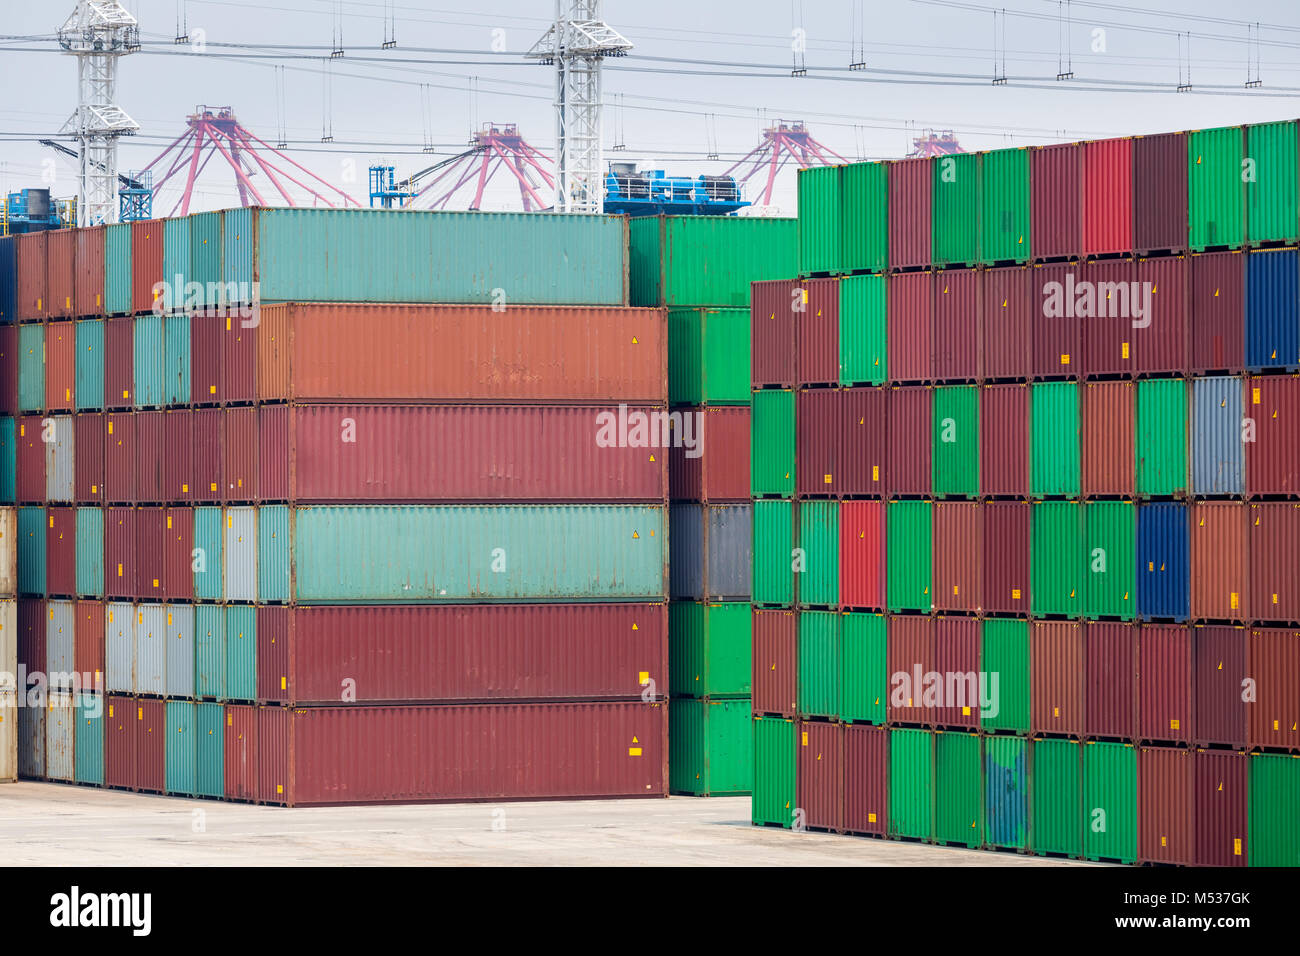 container stack yards Stock Photo